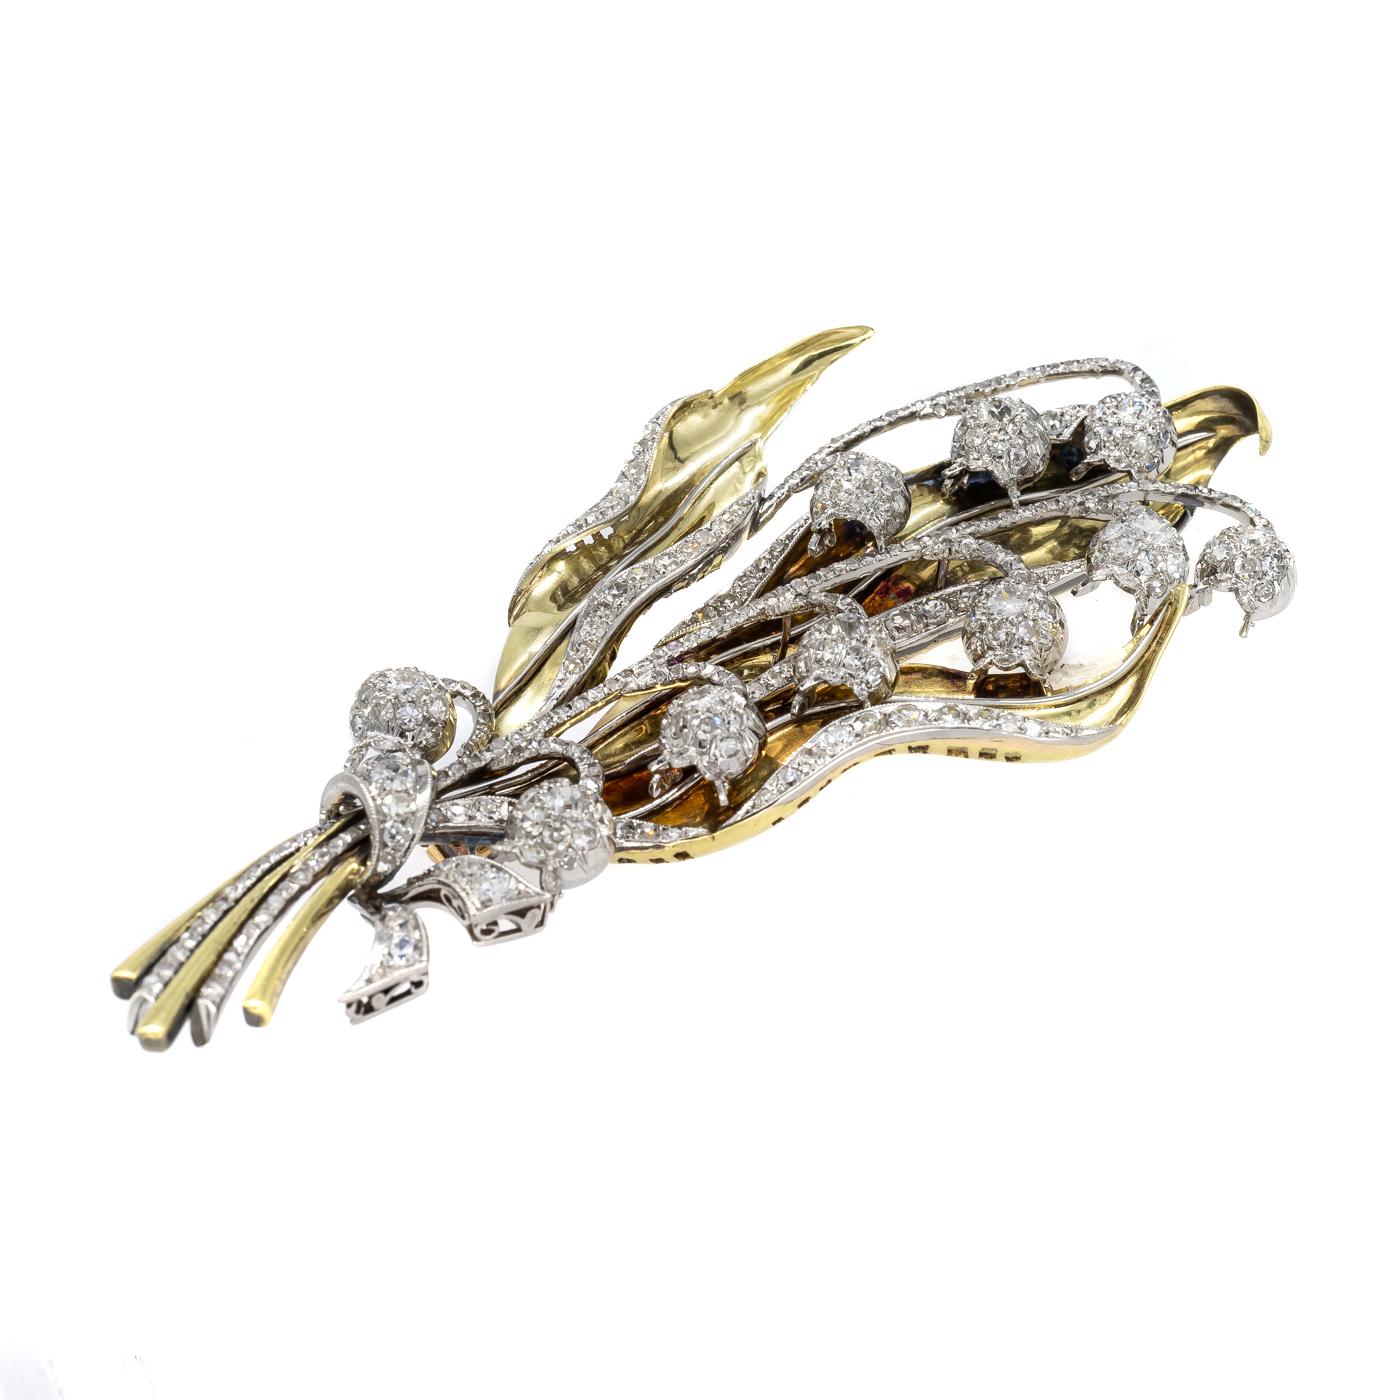 A lily-of-the-valley brooch, set with rose-cut, eight-cut and old-cut diamonds, mounted in yellow and white gold, with articulating flower heads, in an Alexandre Loeb, Sao Paulo, red velvet box, circa 1940.